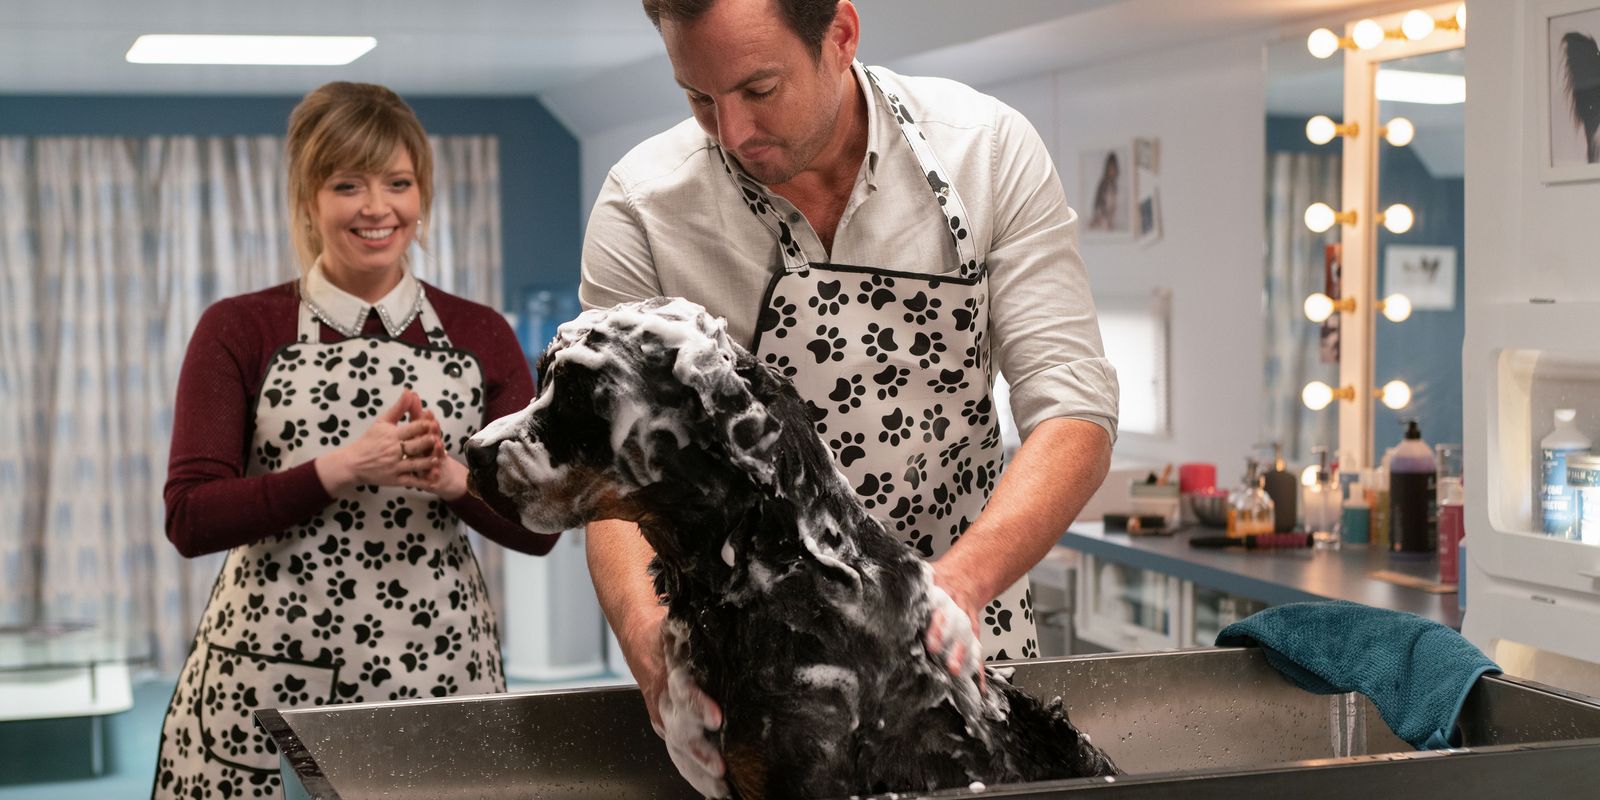 Kids Film "Show Dogs" Gets Neutered After 'Sexual Grooming' Scene Outcry